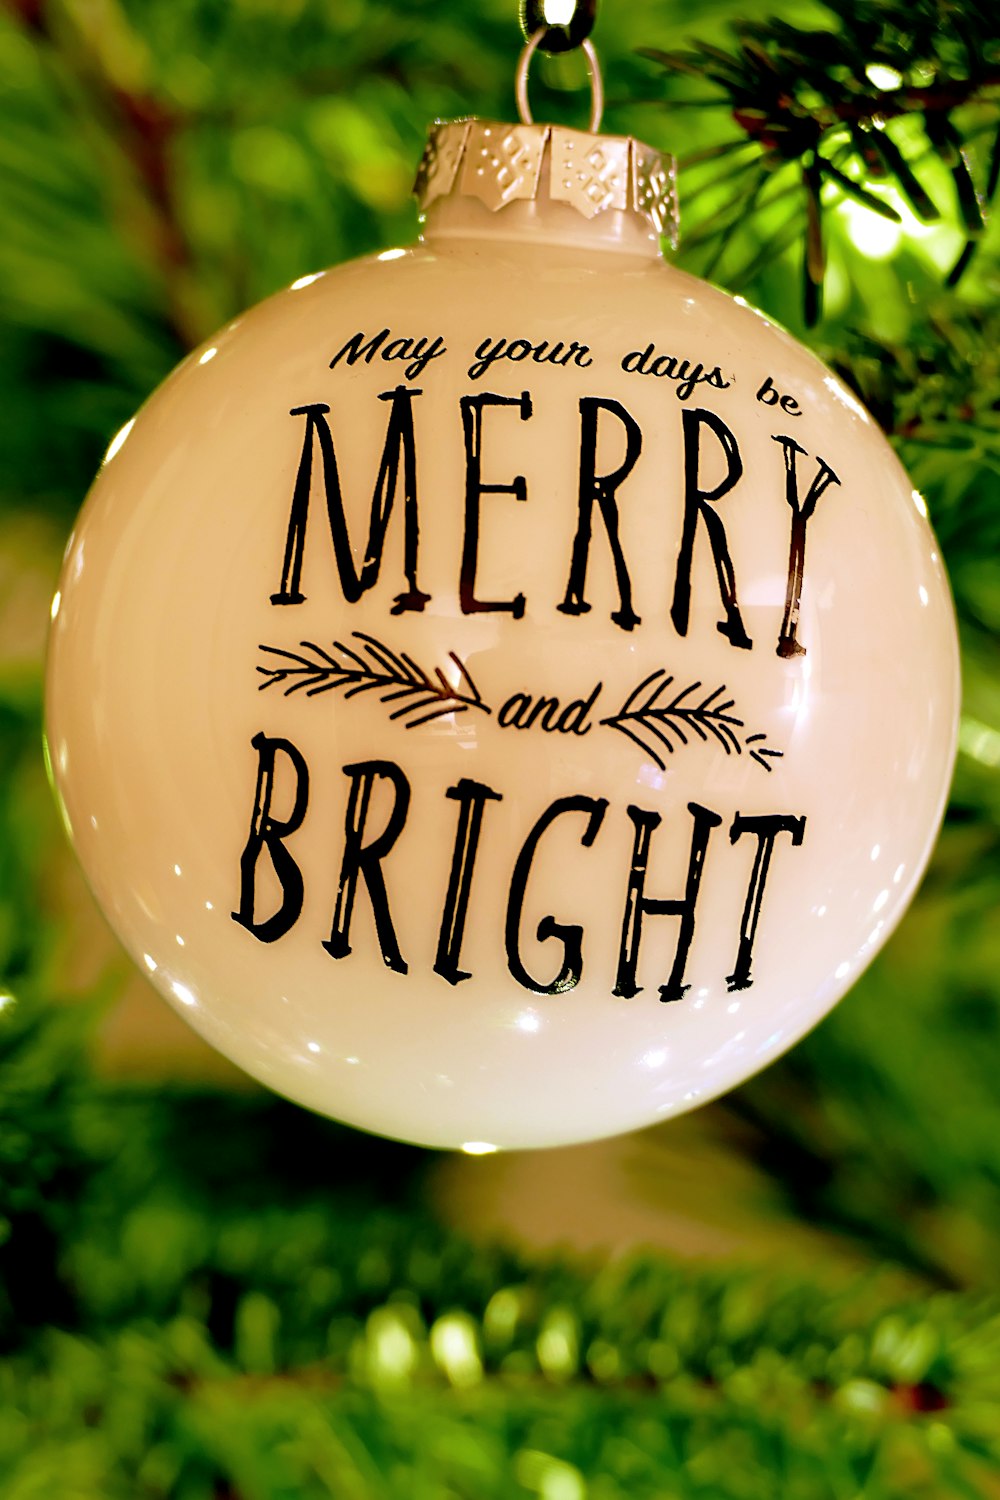 white and black Merry Bright Christmas bauble